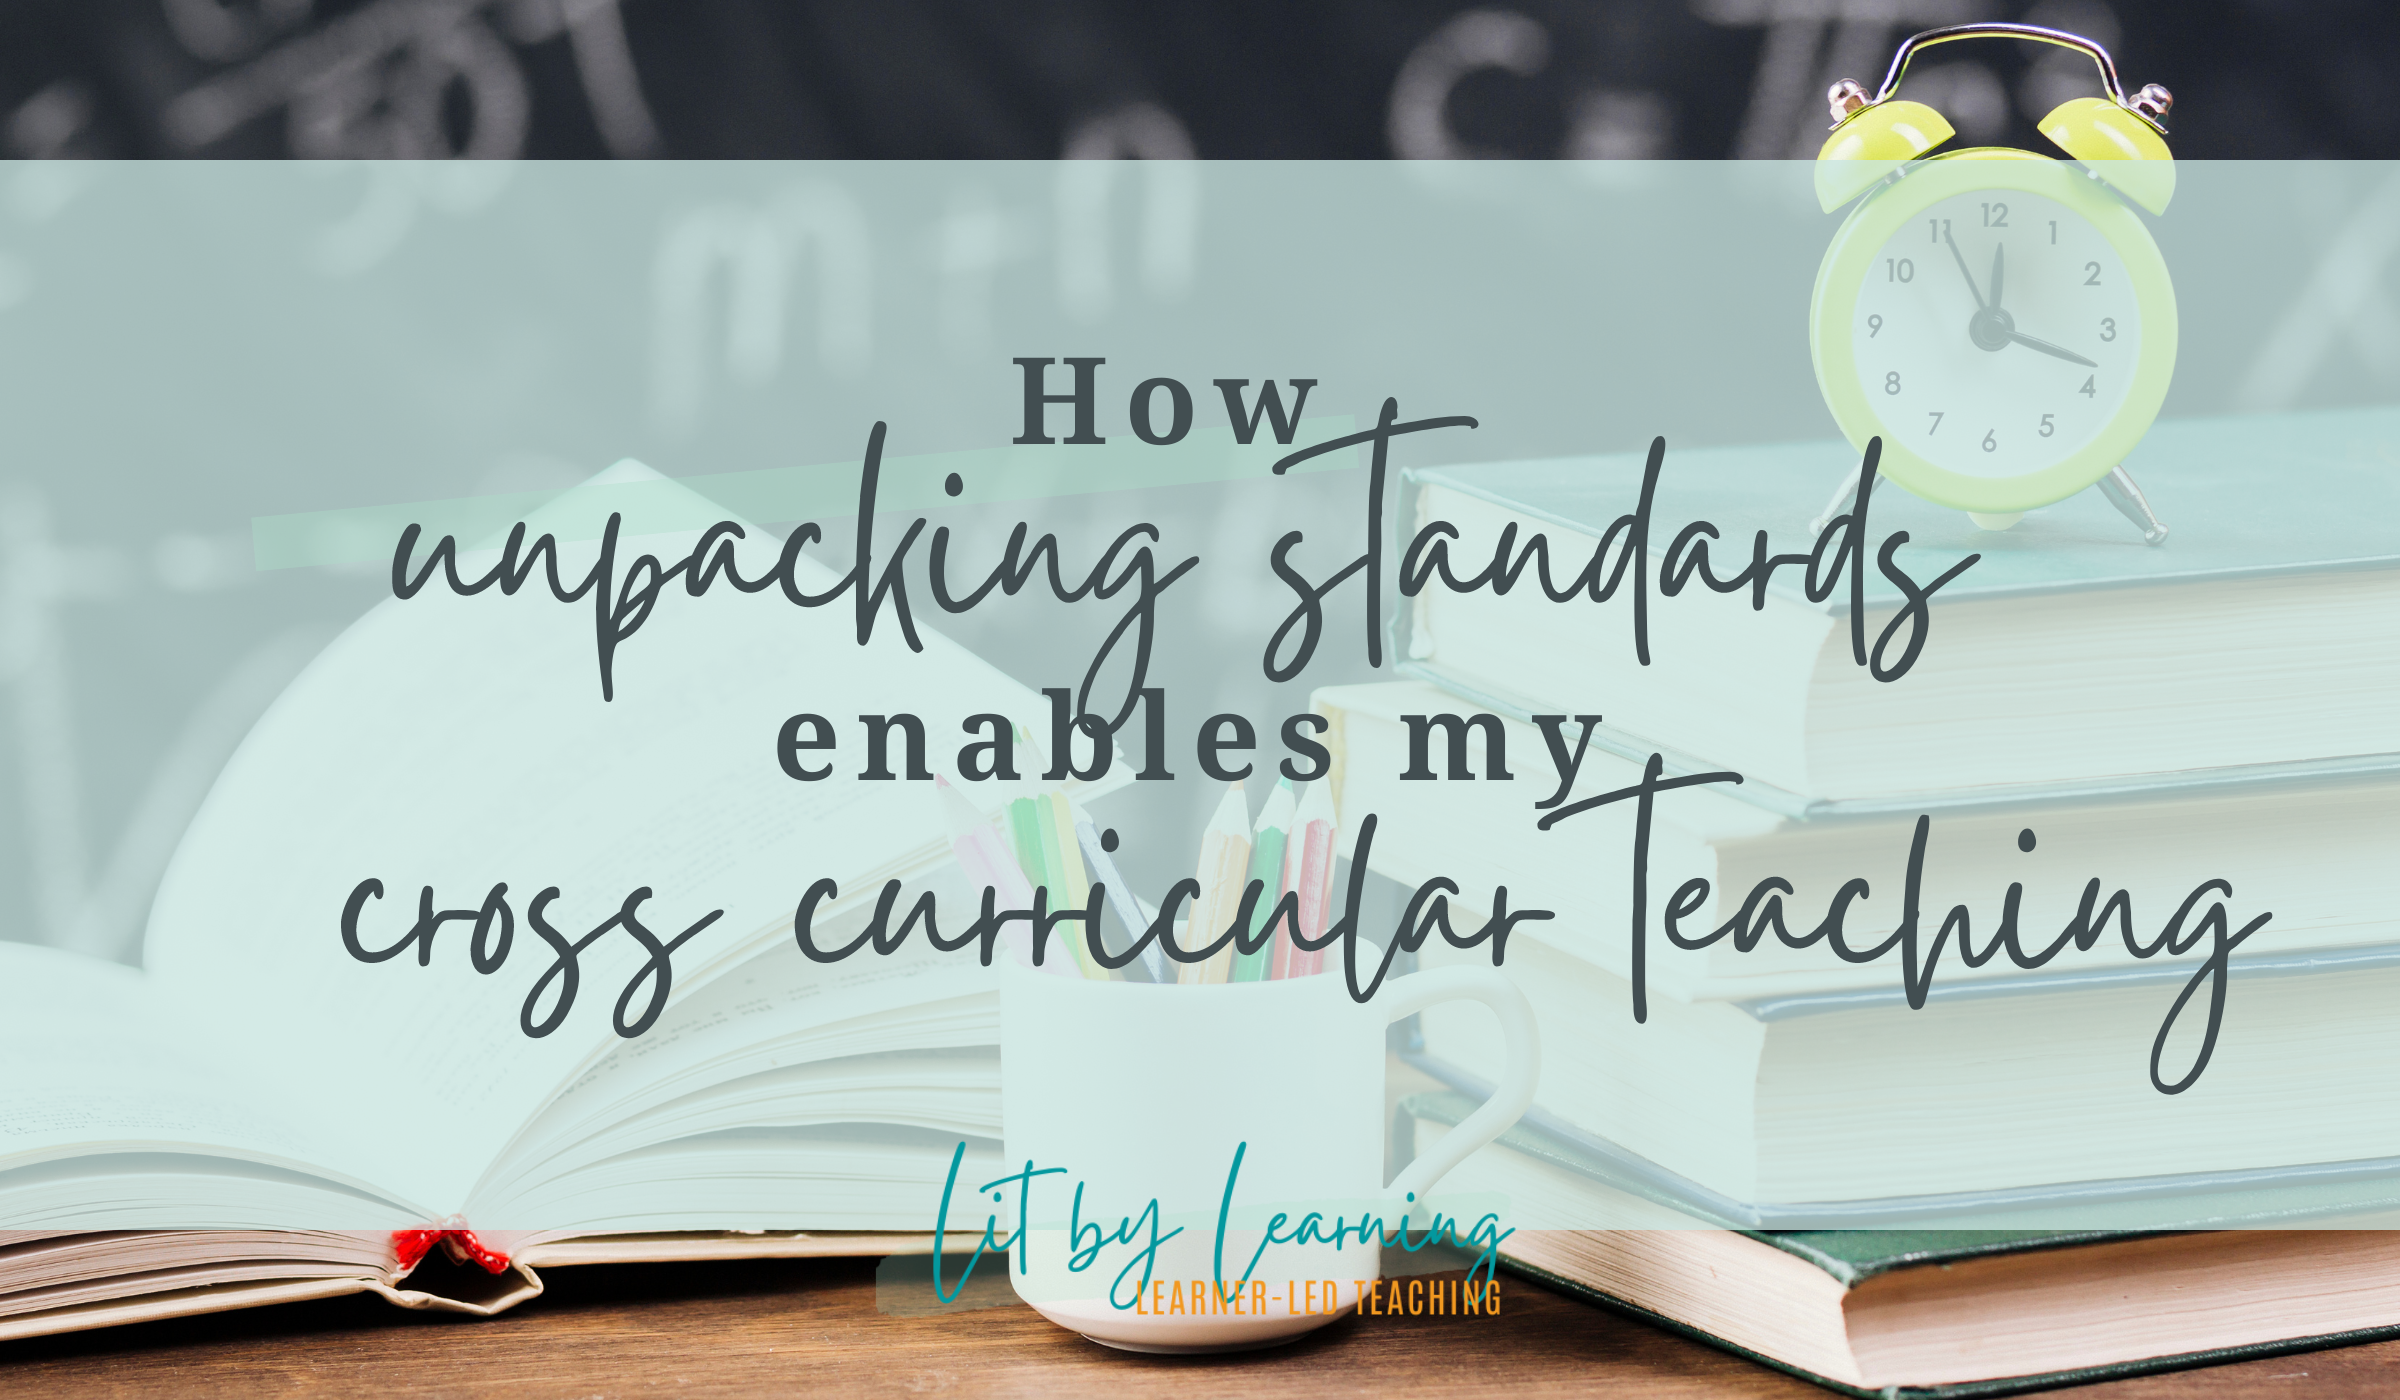 The title reads "how unpacked standards enable my cross curricular teaching)